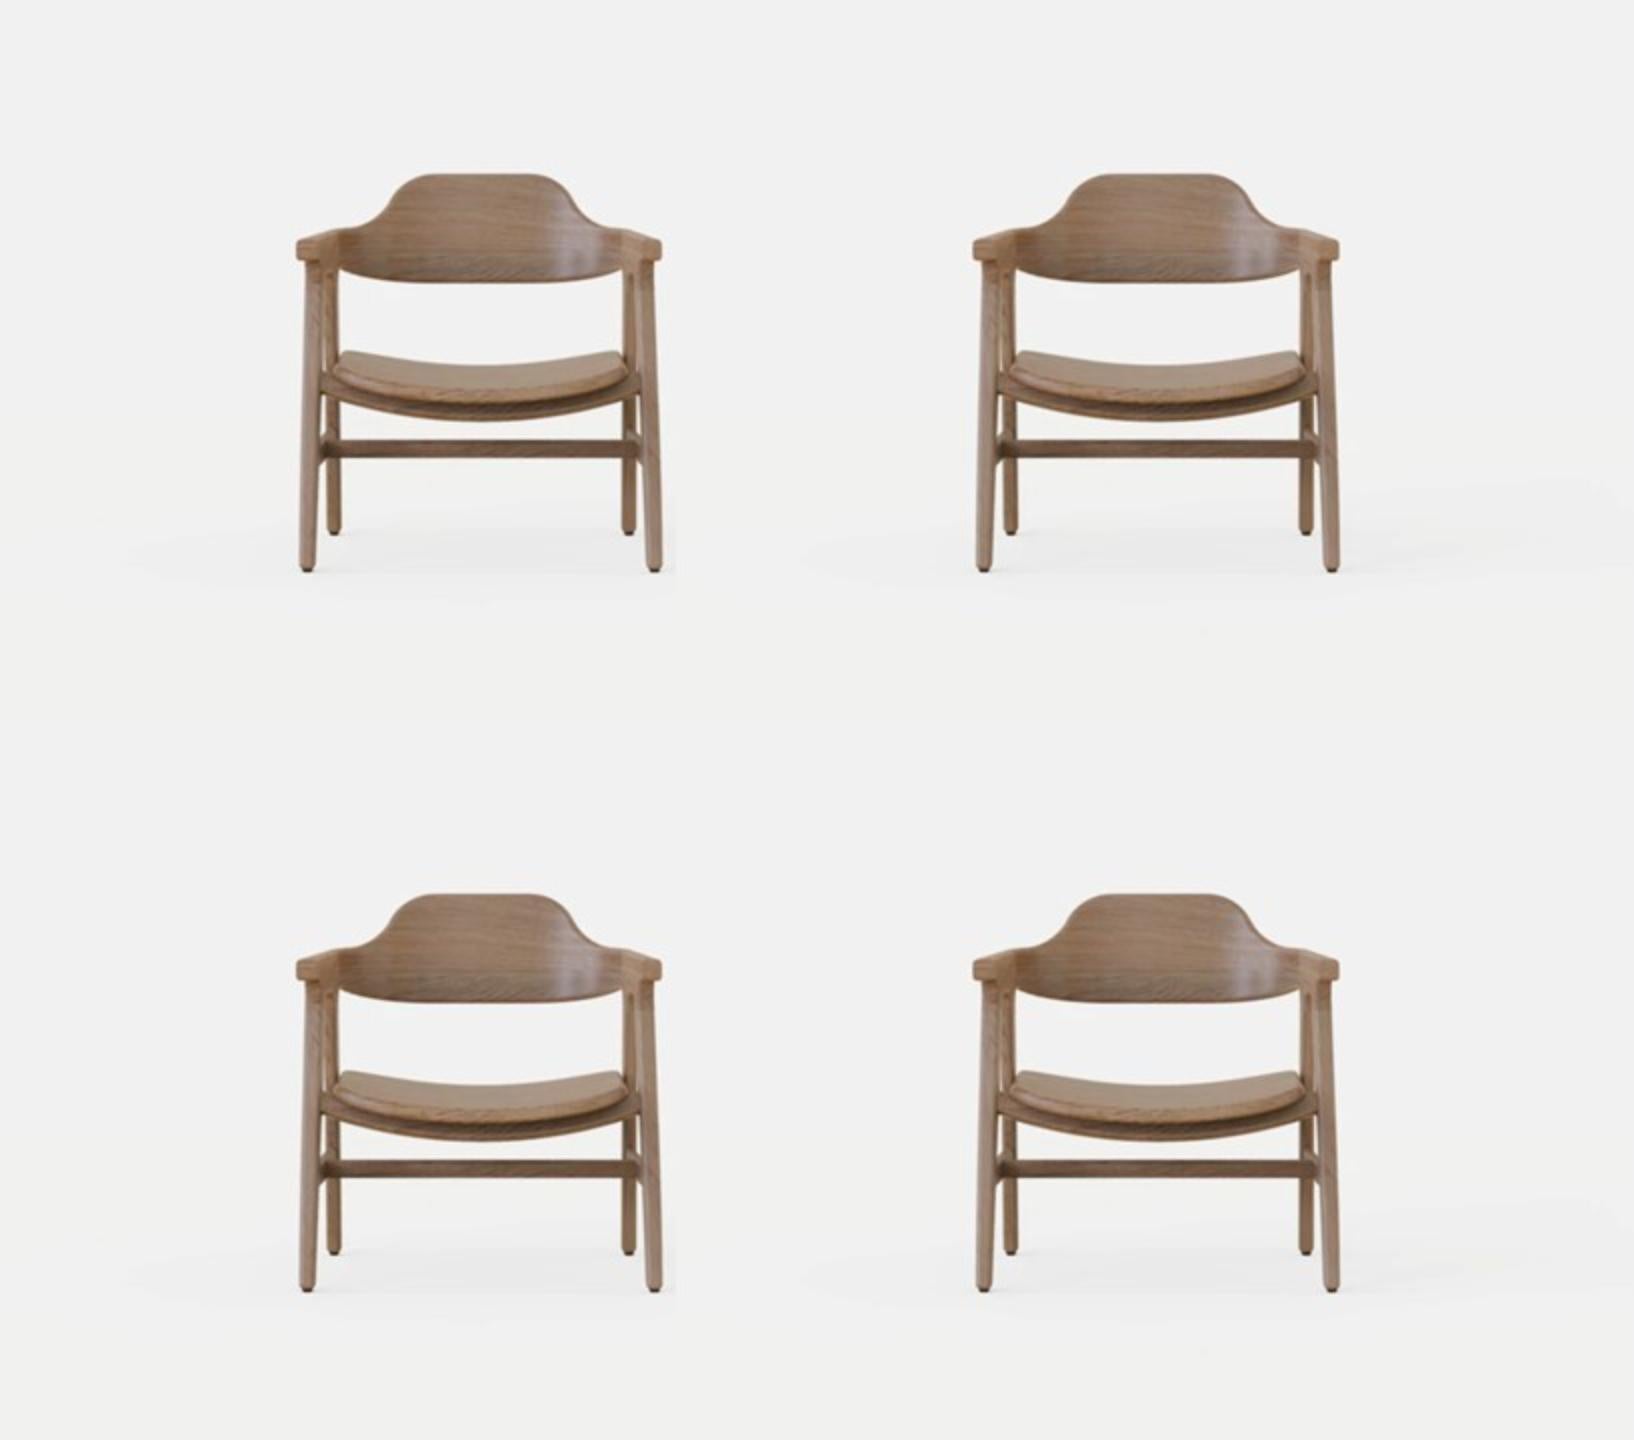 Set of 4 Sensato armchair by Sebastián Angeles
Material: Walnut
Dimensions: W 45 x D 40 x 100 cm
Also Available: Other colors available.

The love of processes, the properties of materials, details and concepts make Dorica Taller a study not